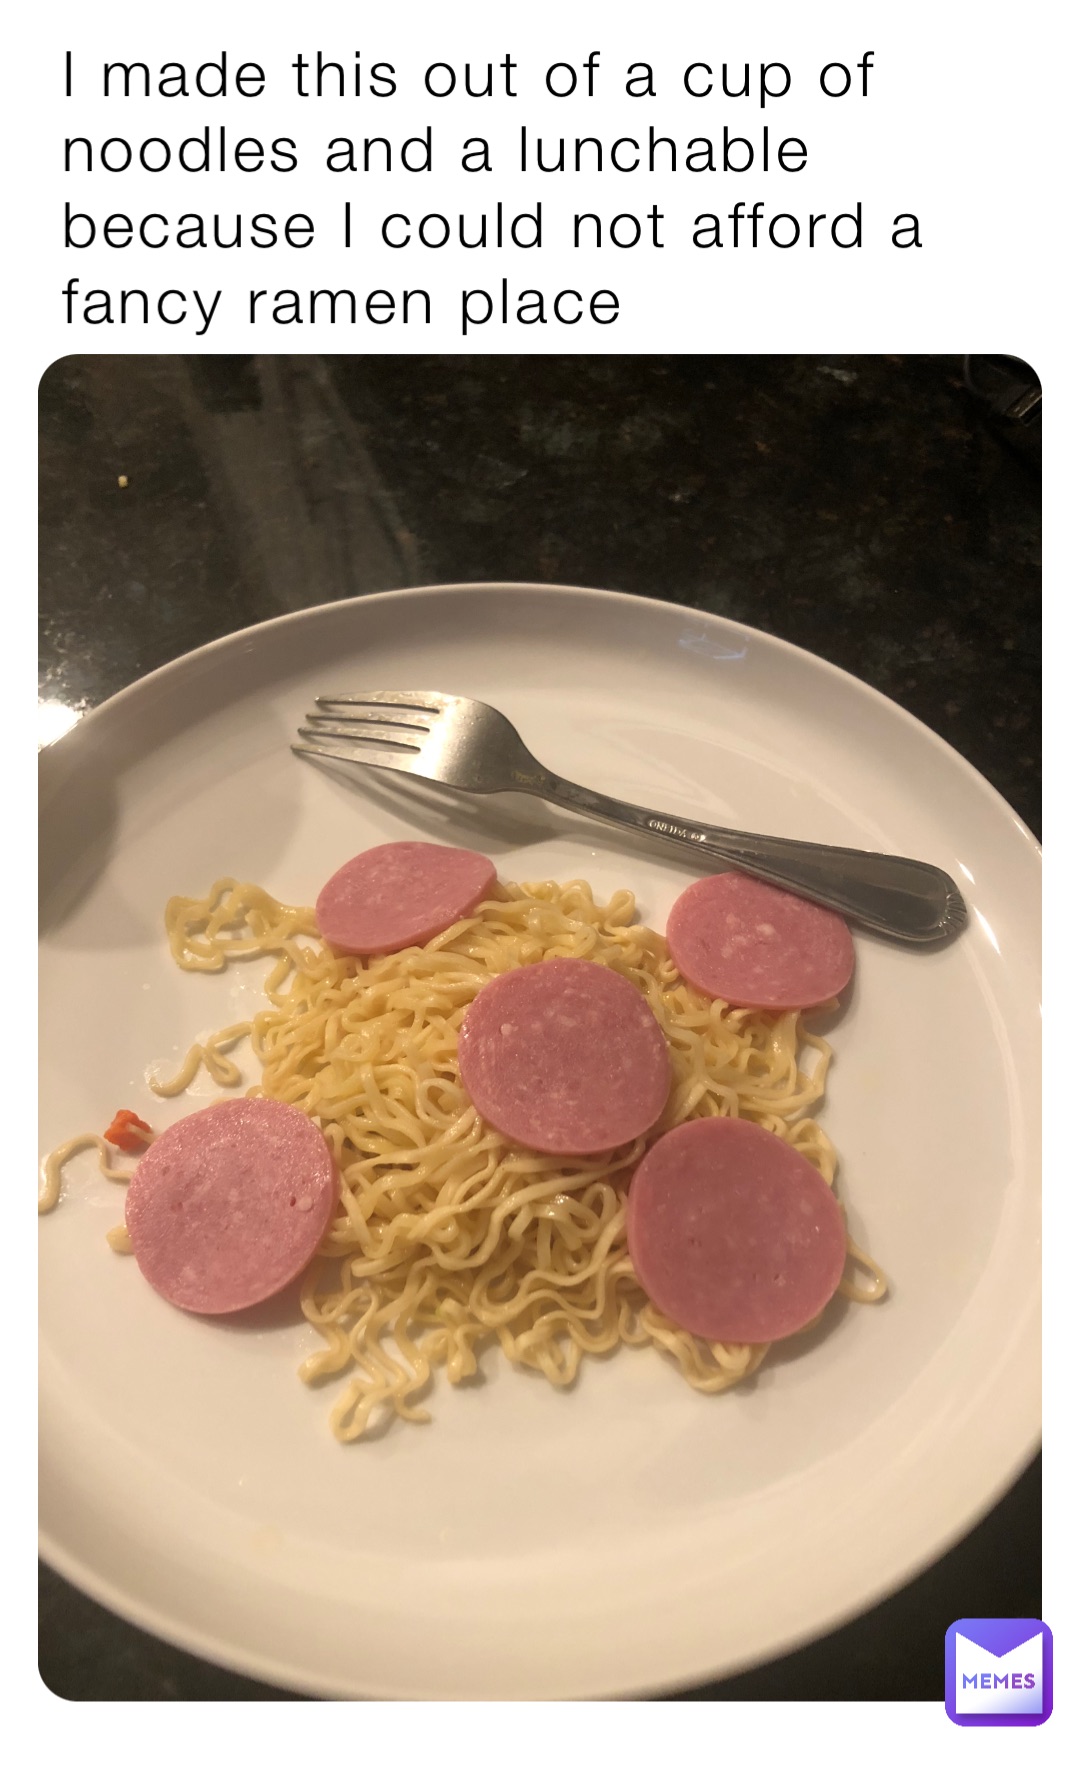 I made this out of a cup of noodles and a lunchable because I could not afford a fancy ramen place